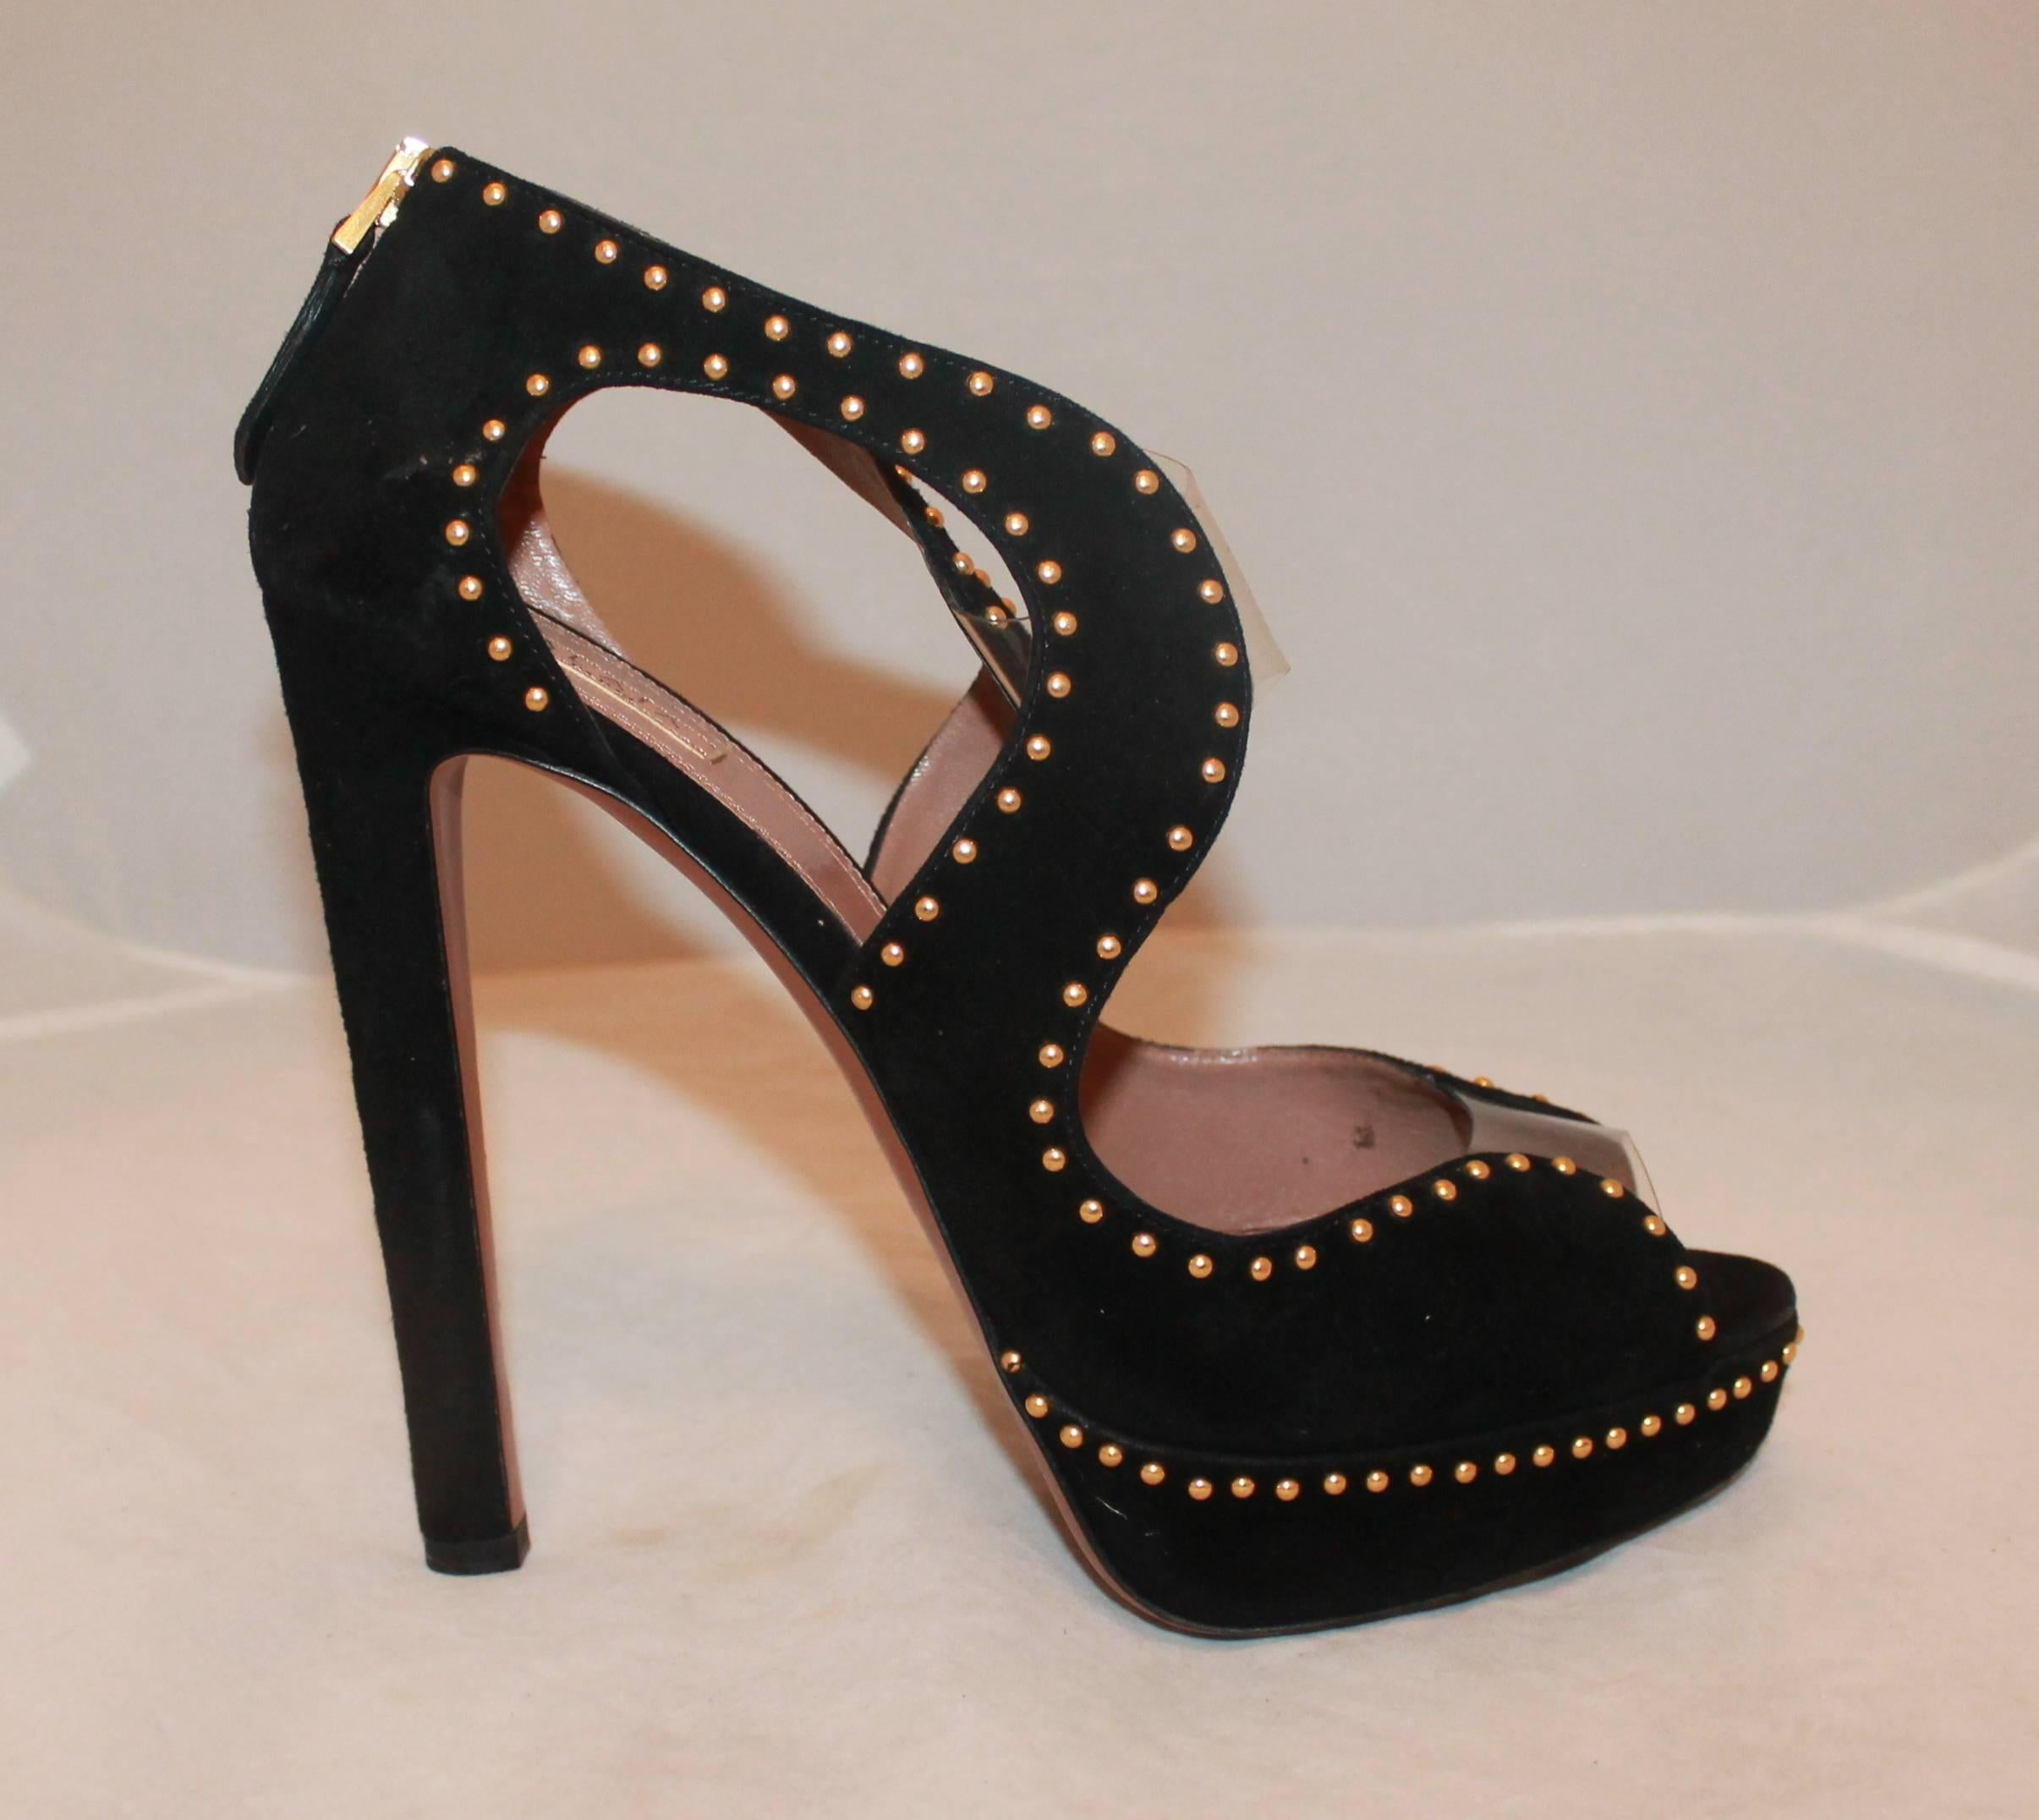 Alaia Black Suede Cutout Platform Heels w/ Small Gold Studs - 40.5.  These striking heels are in excellent condition with only minor markings on the heel.  They feature a unique cutout w/ two plastic sections, open toes, and small gold studs along